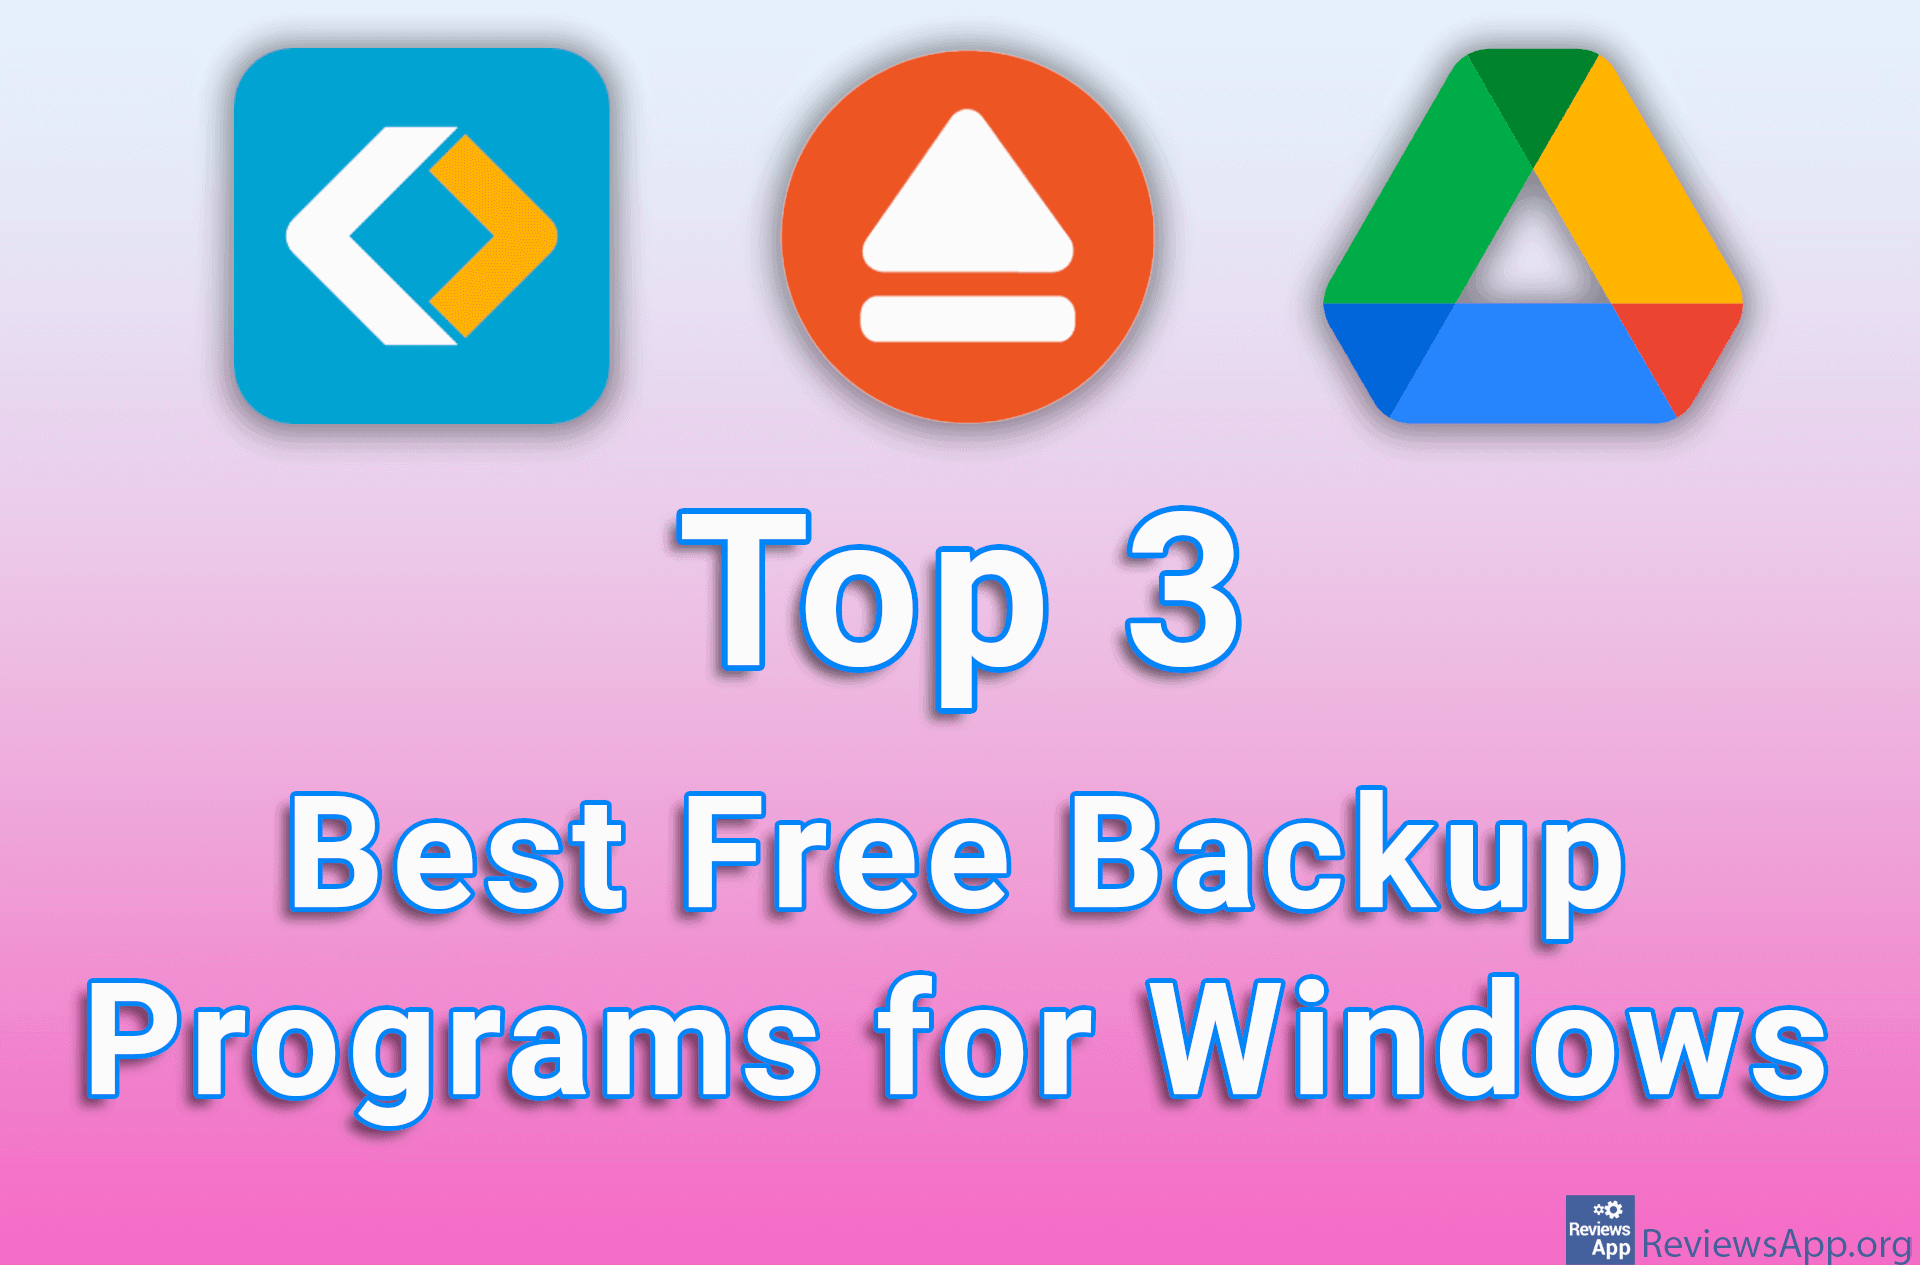 Top 3 Best Free Backup Programs for Windows